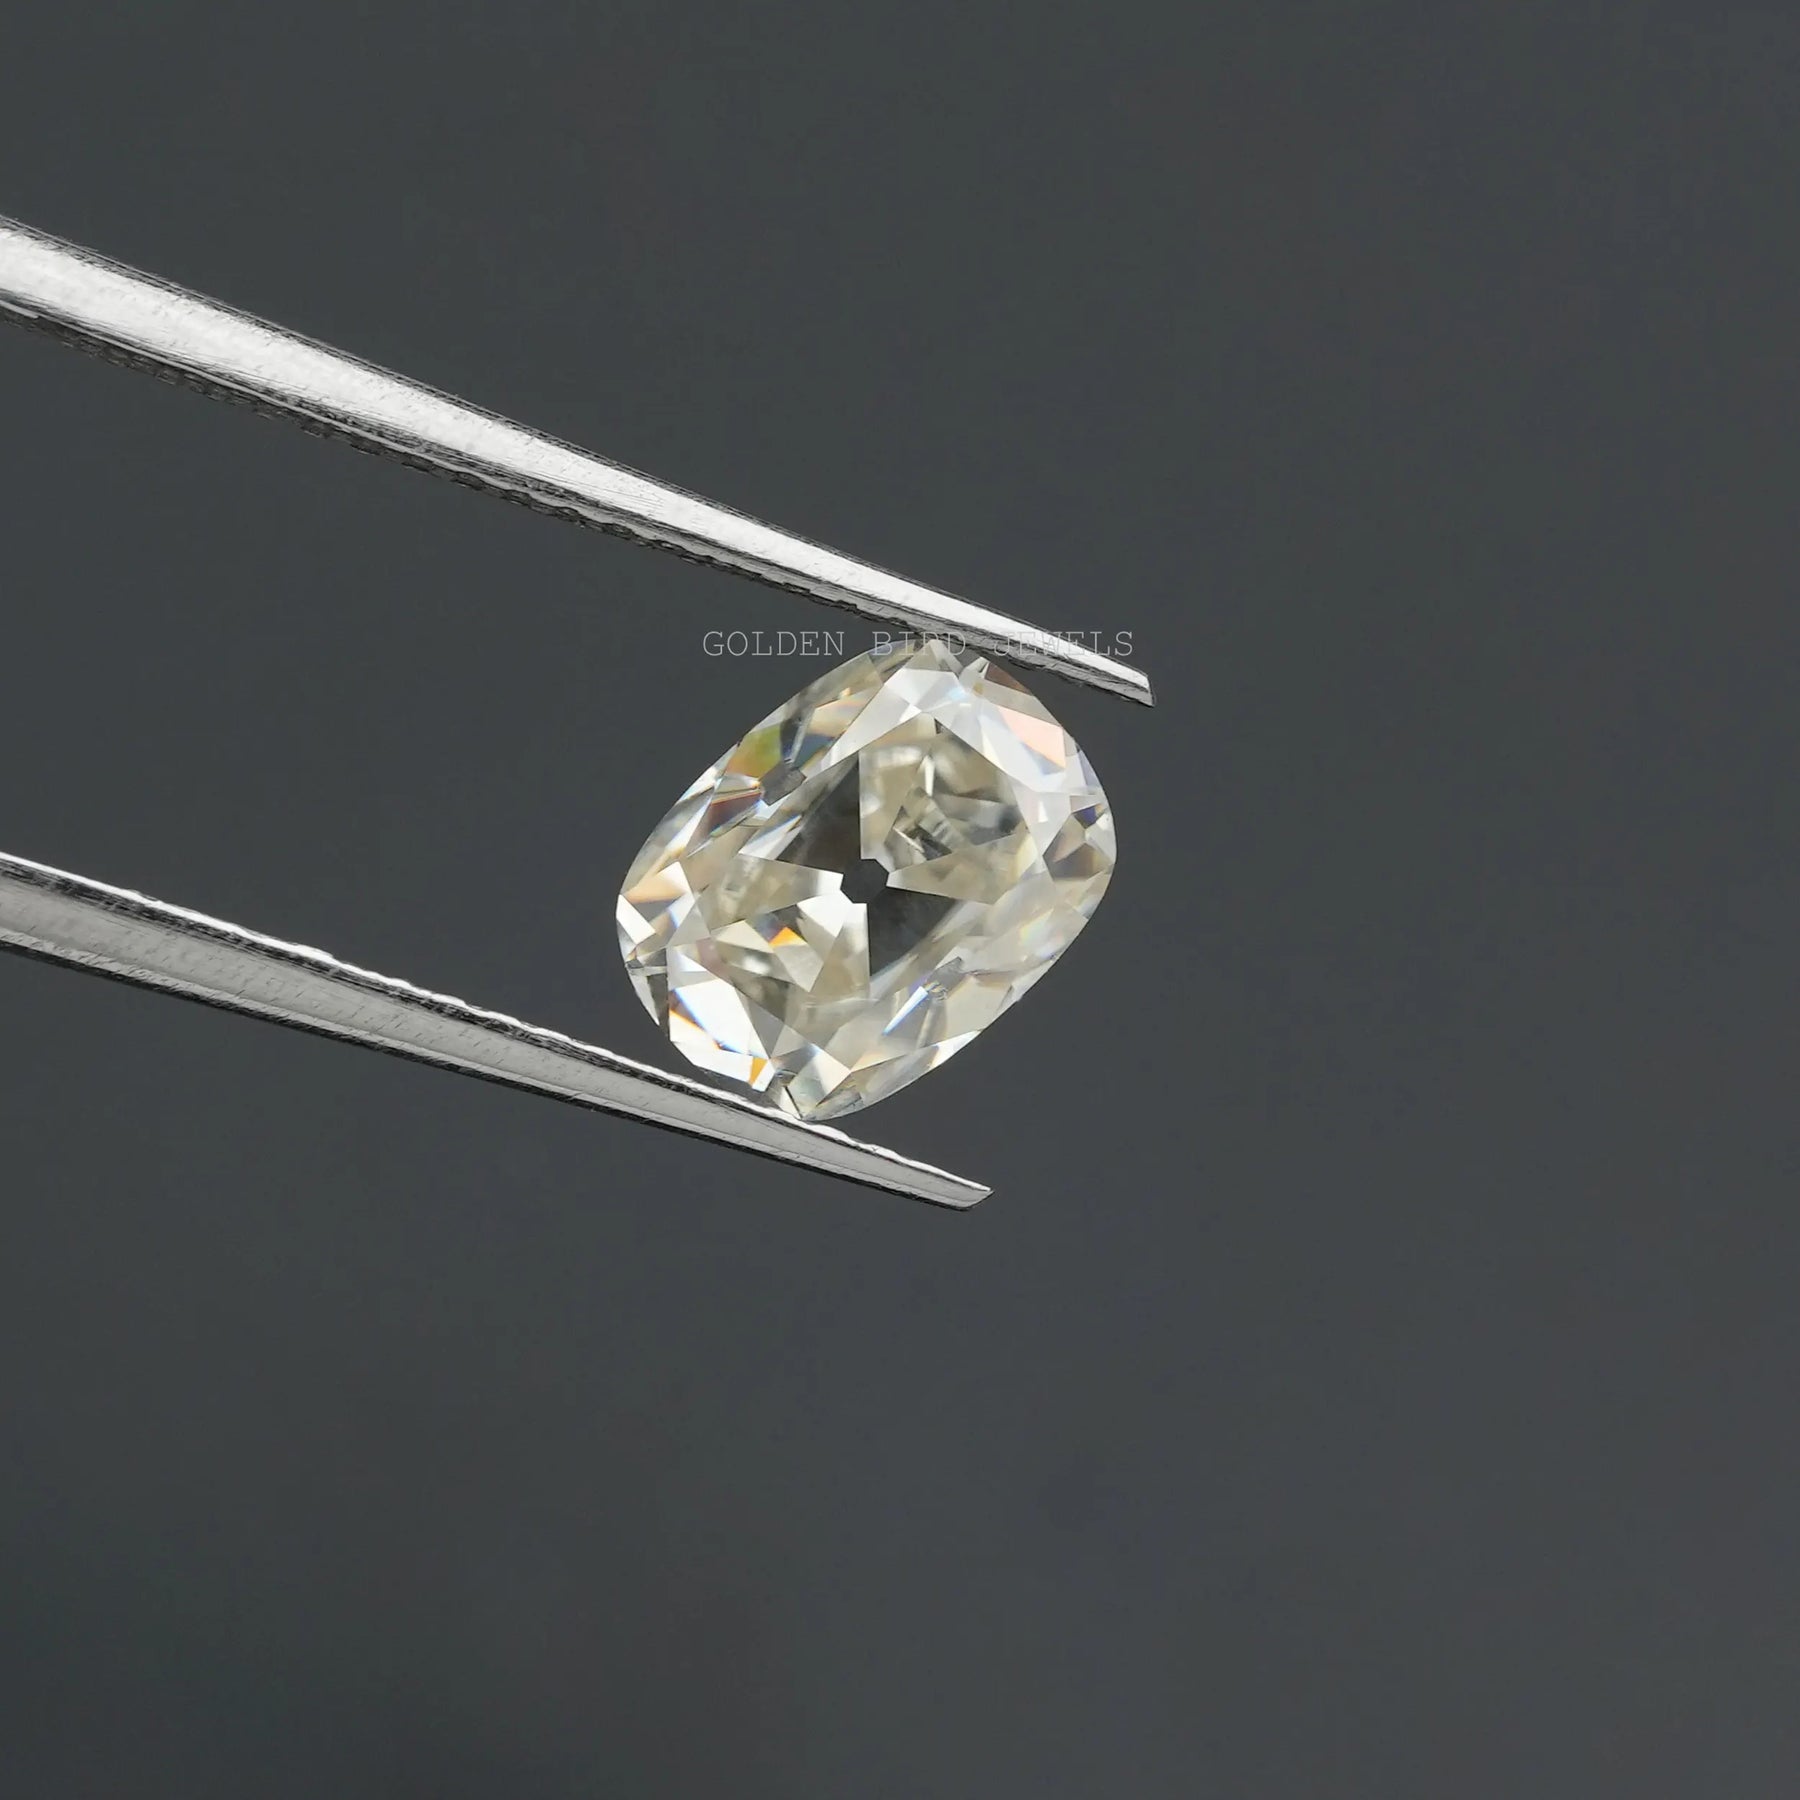 In Tweezers View Of Old Cut Loose Moissanite in Cushion Shaped